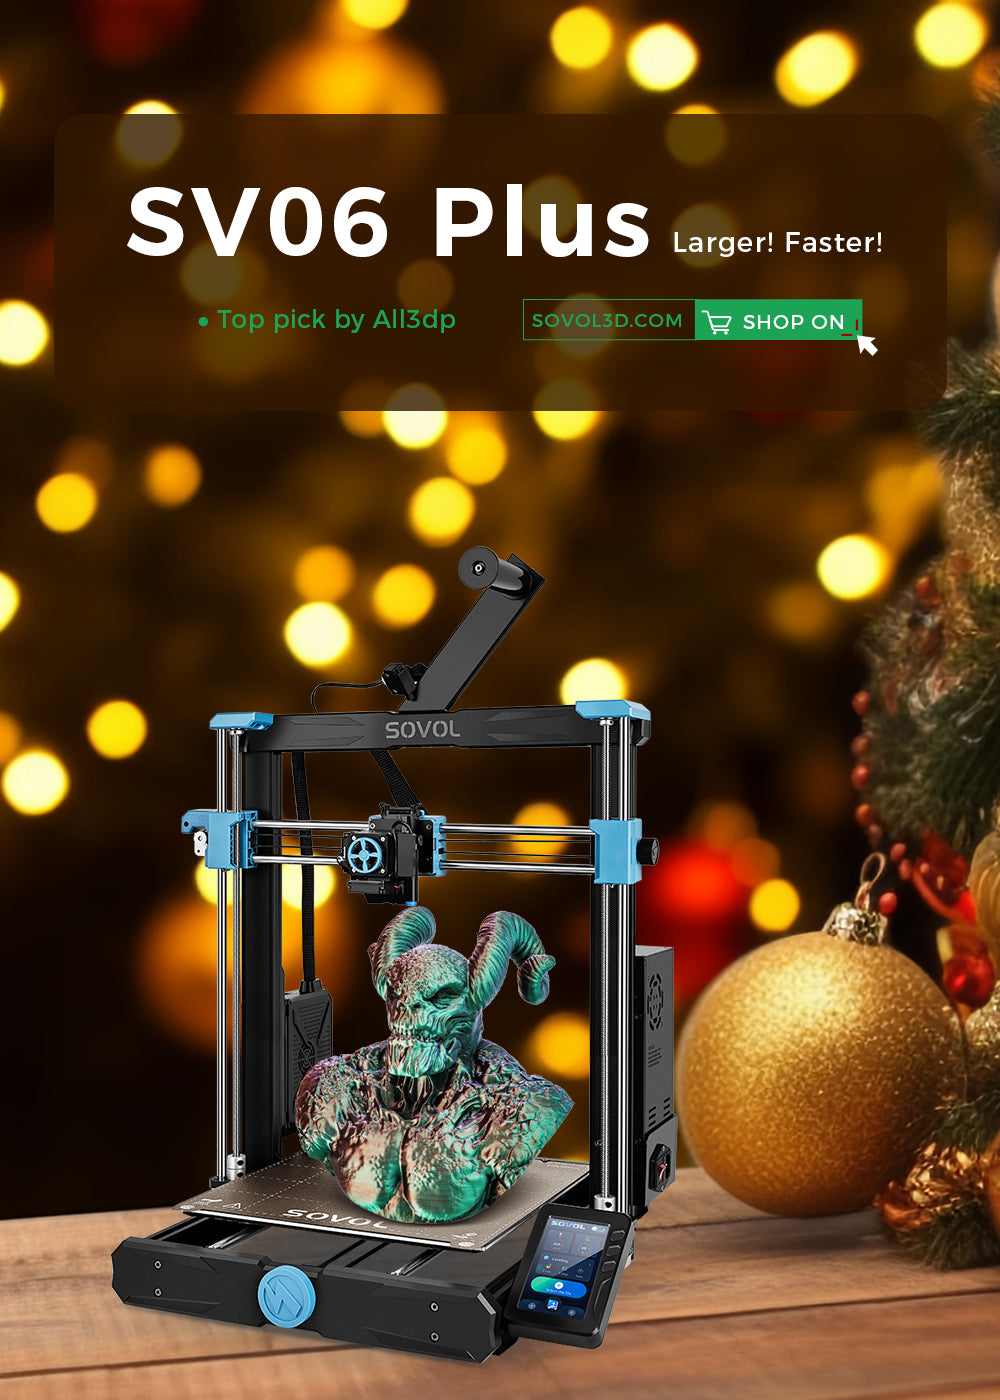 Resin Curing from Sovol 3D - The Sovol 3D SL-1 Review